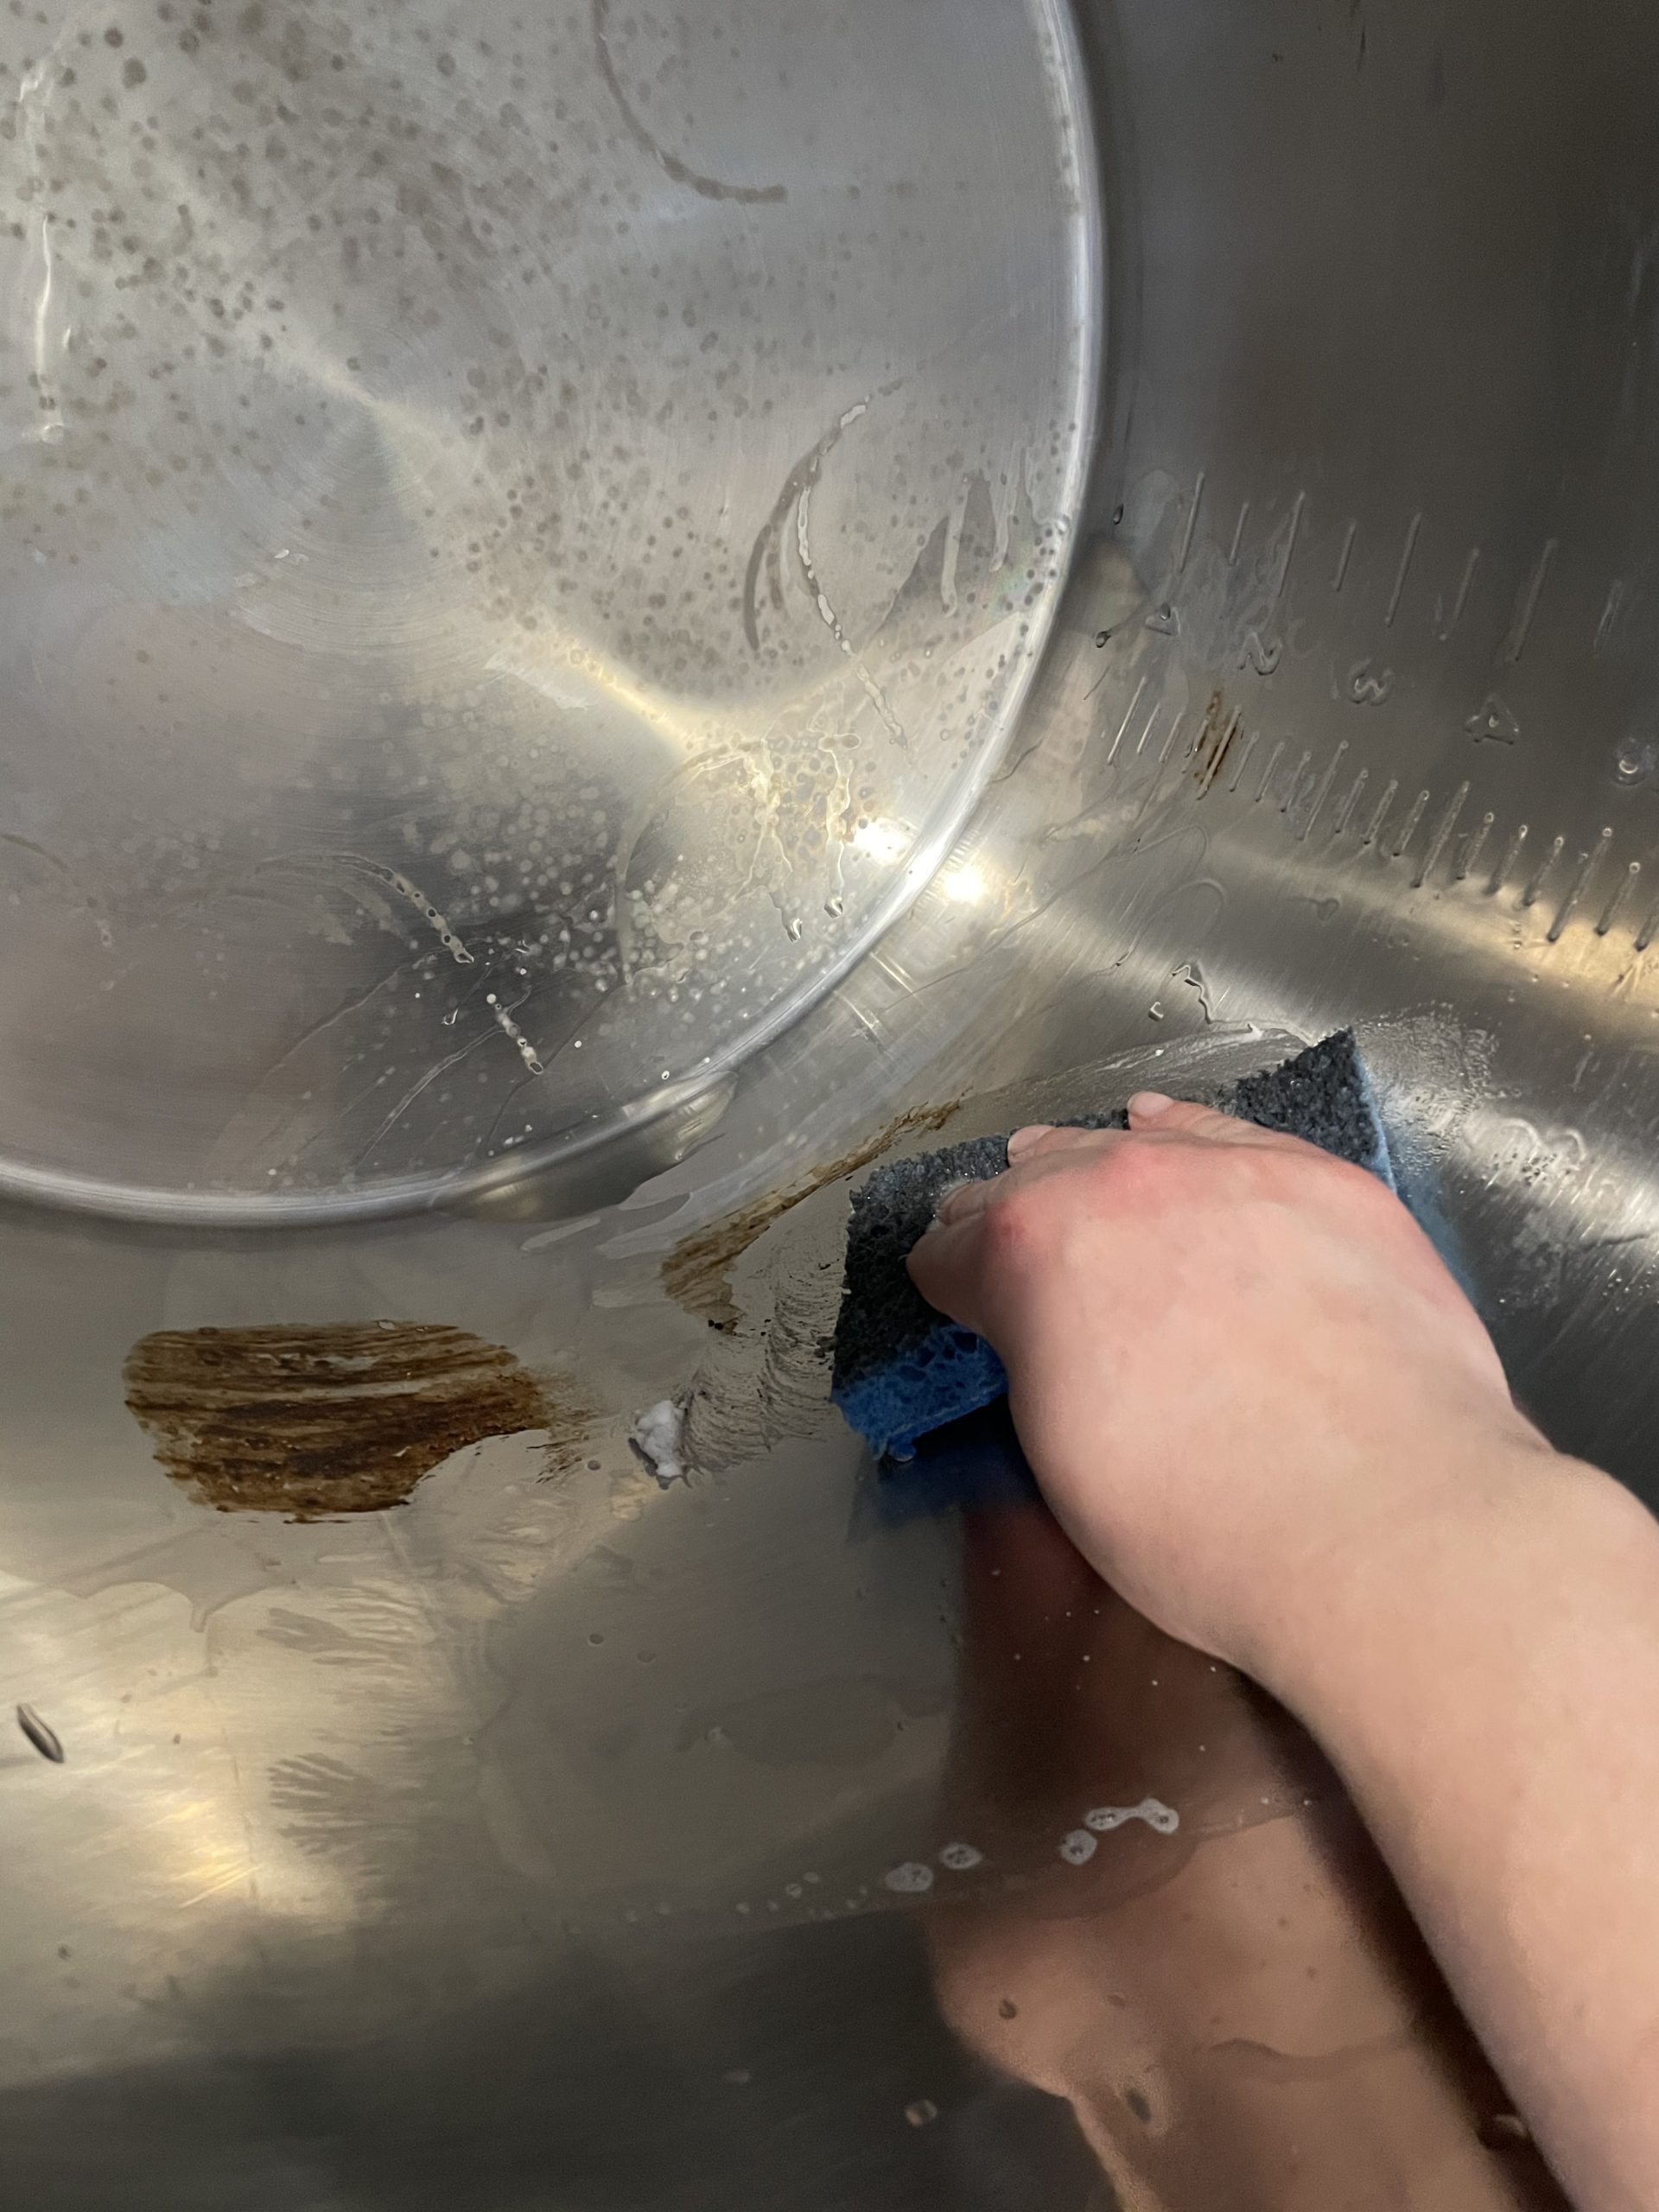 Cleaning Burnt Maple Syrup